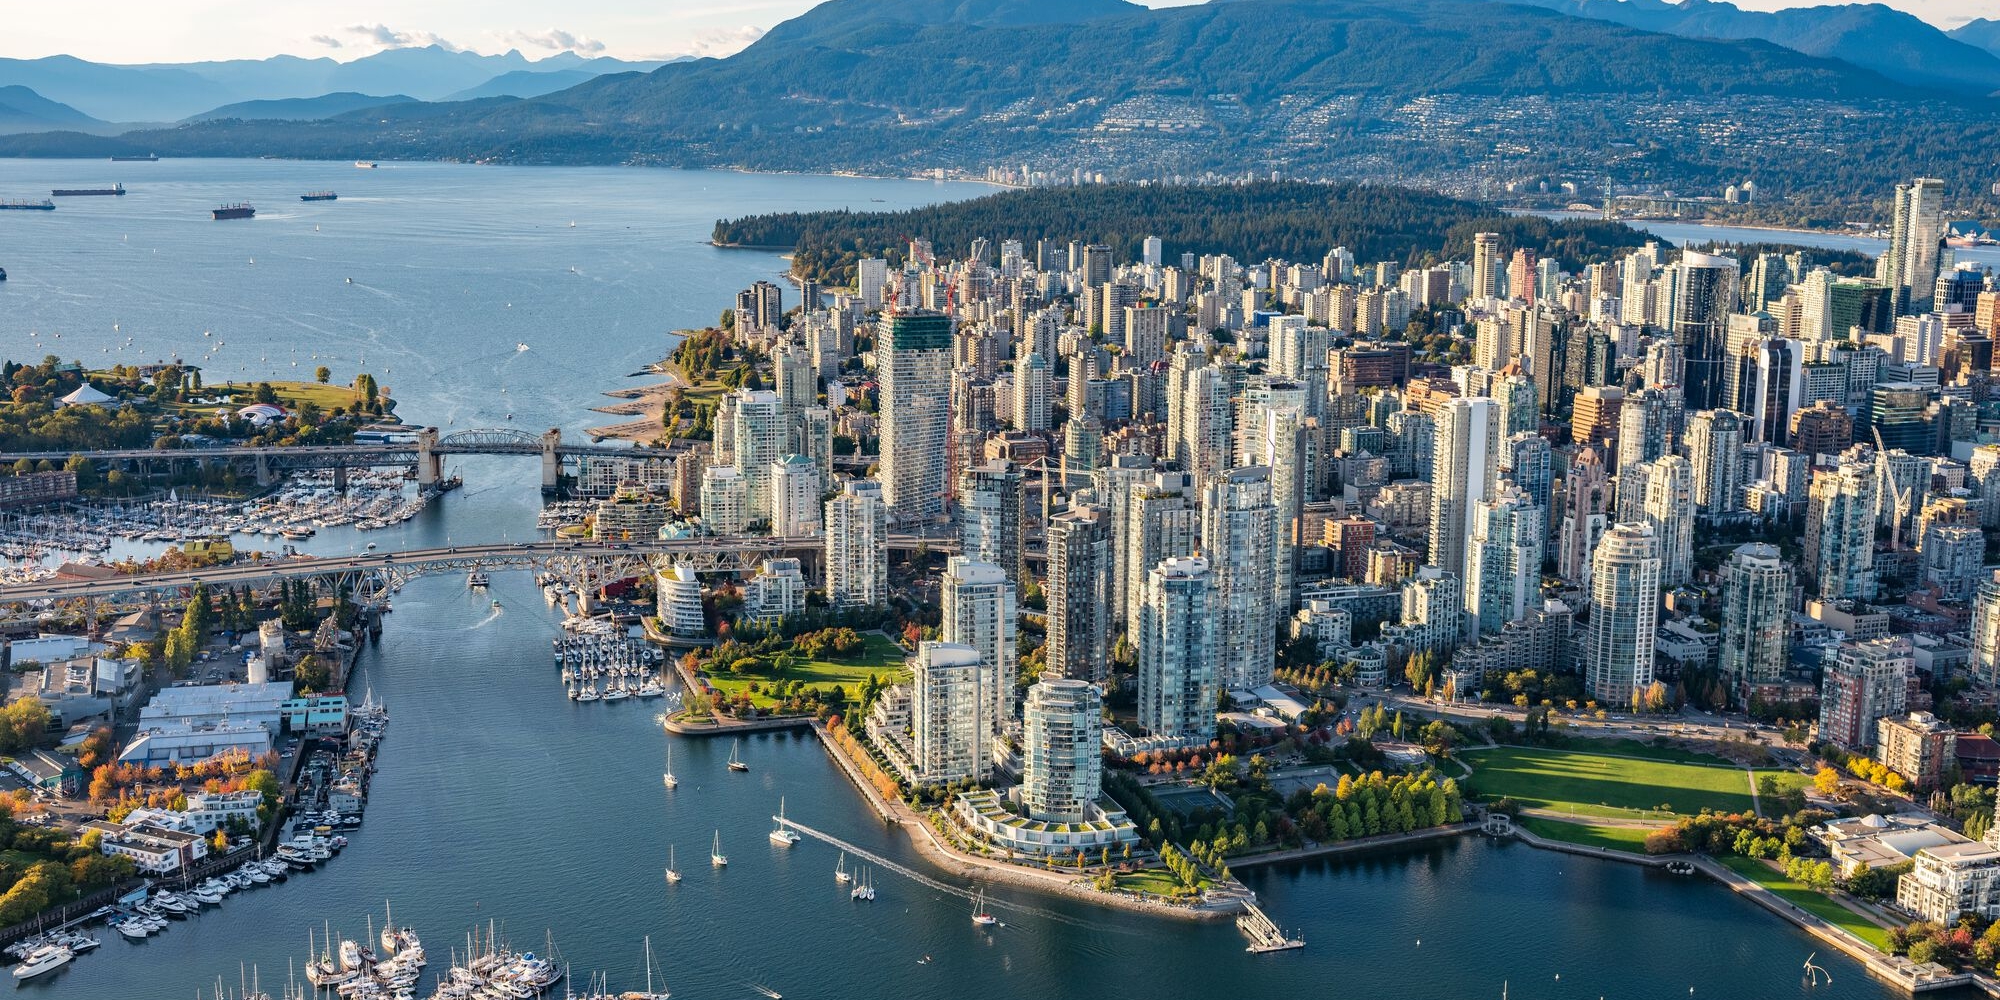 Aerial photo of downtown Vancouver at sunset. The ocean surrounds the landscape, boats fill the marinas and harbour. Both Burrard Bridge and Granville Bridge are seen on the left.